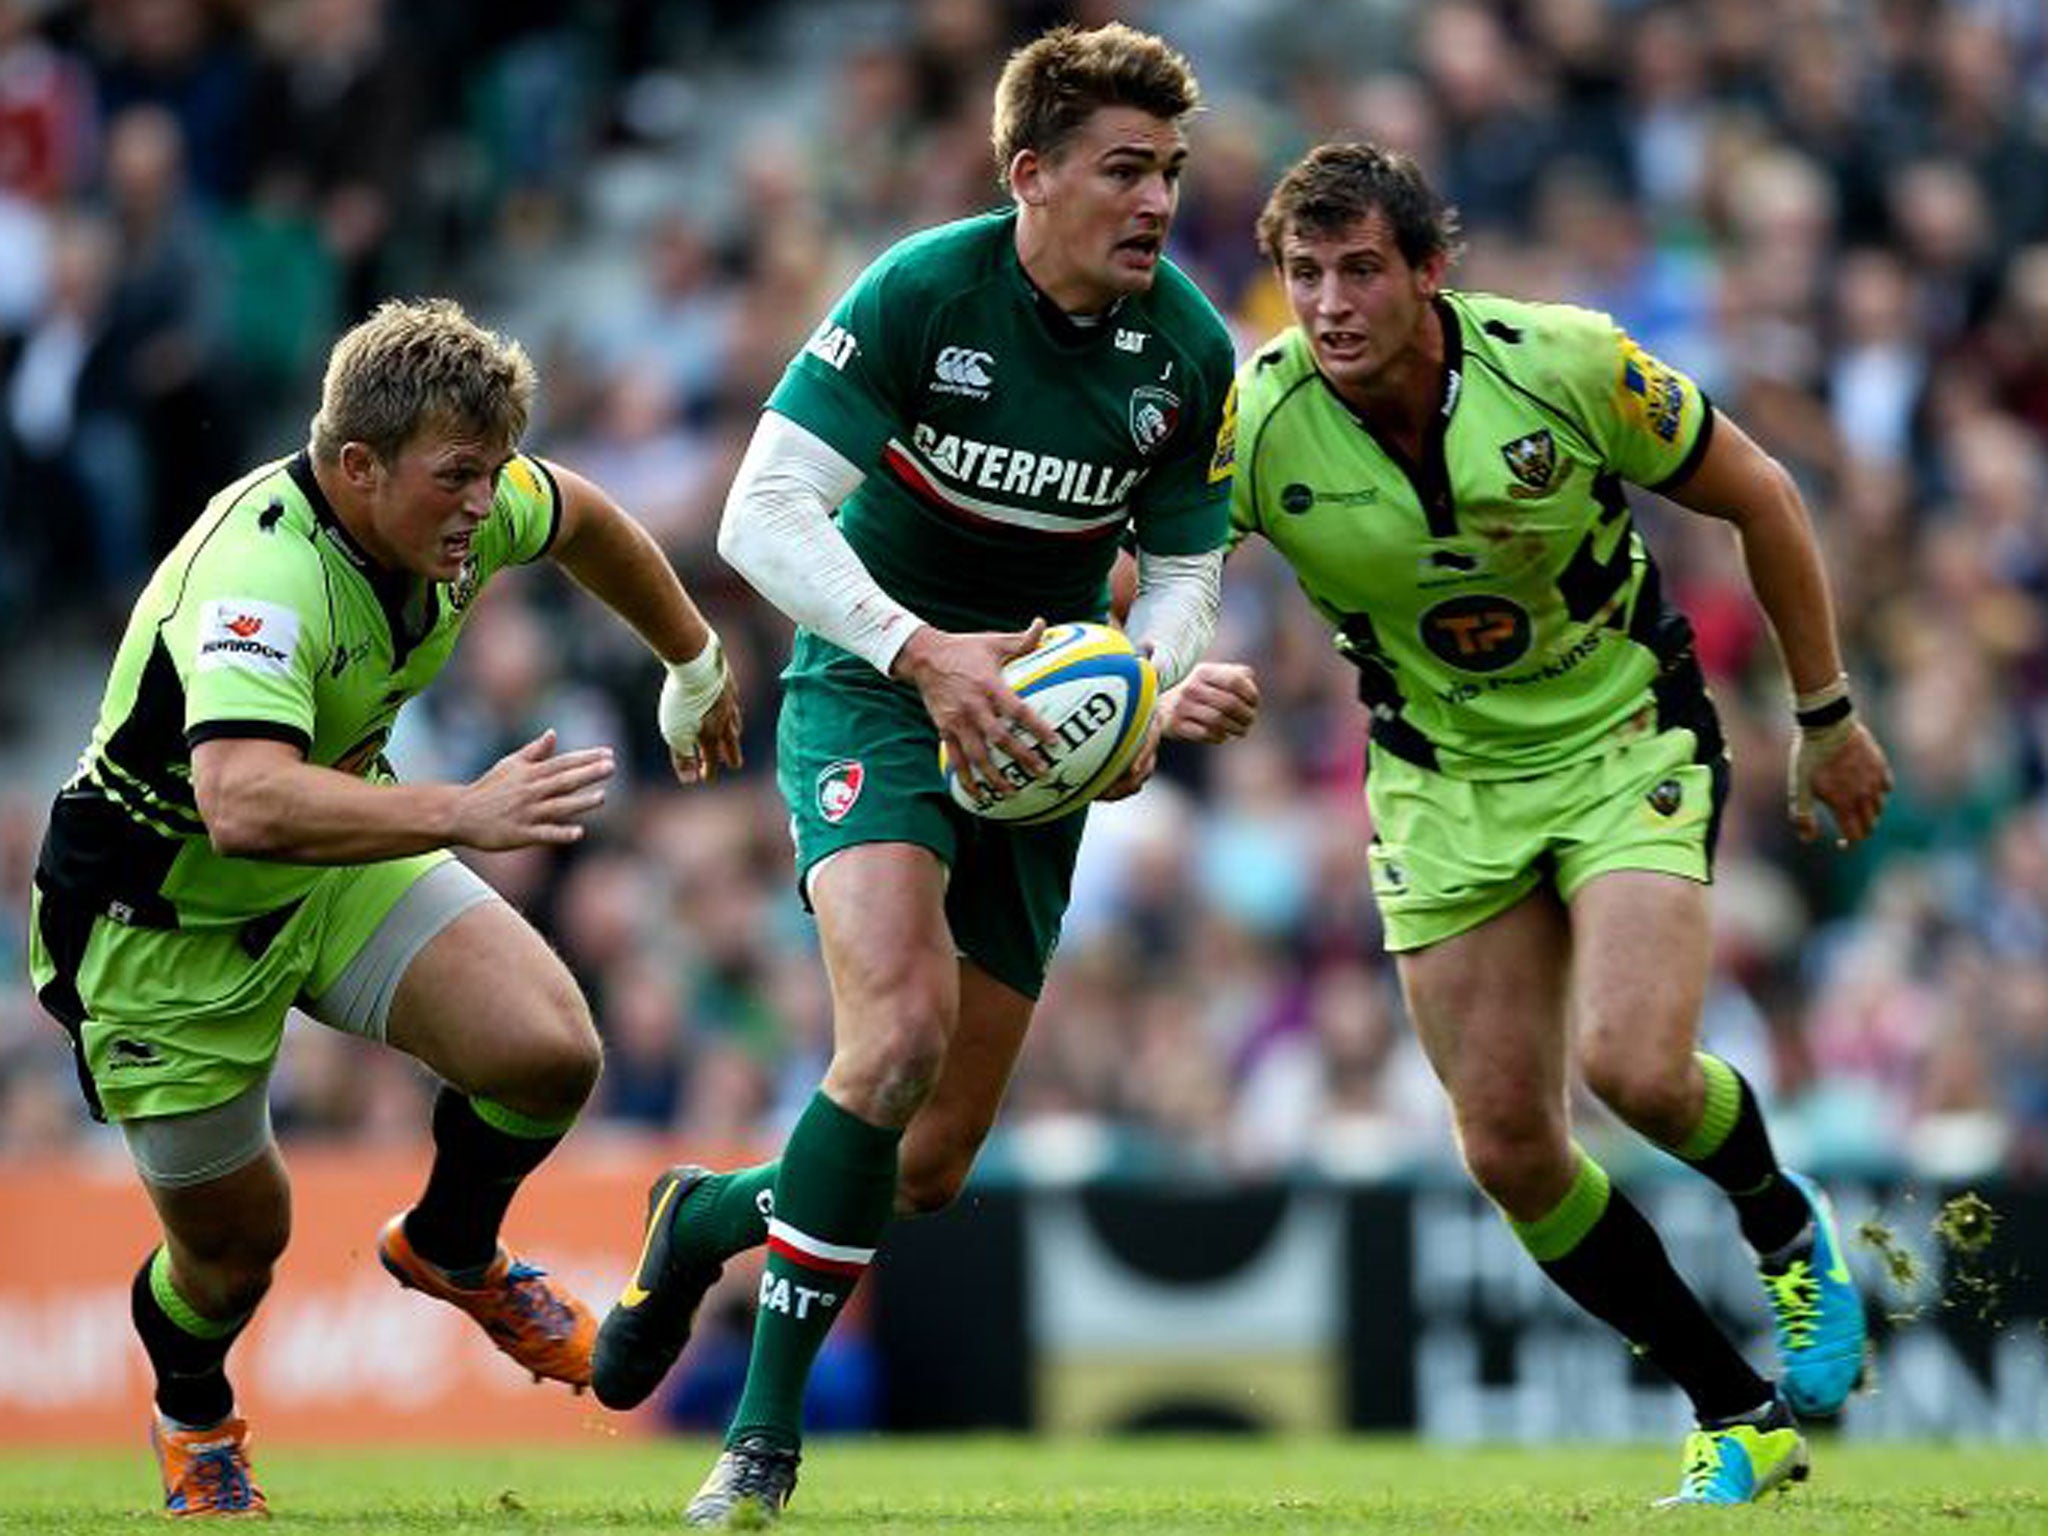 Toby Flood revived Leicester’s fortunes in the last quarter